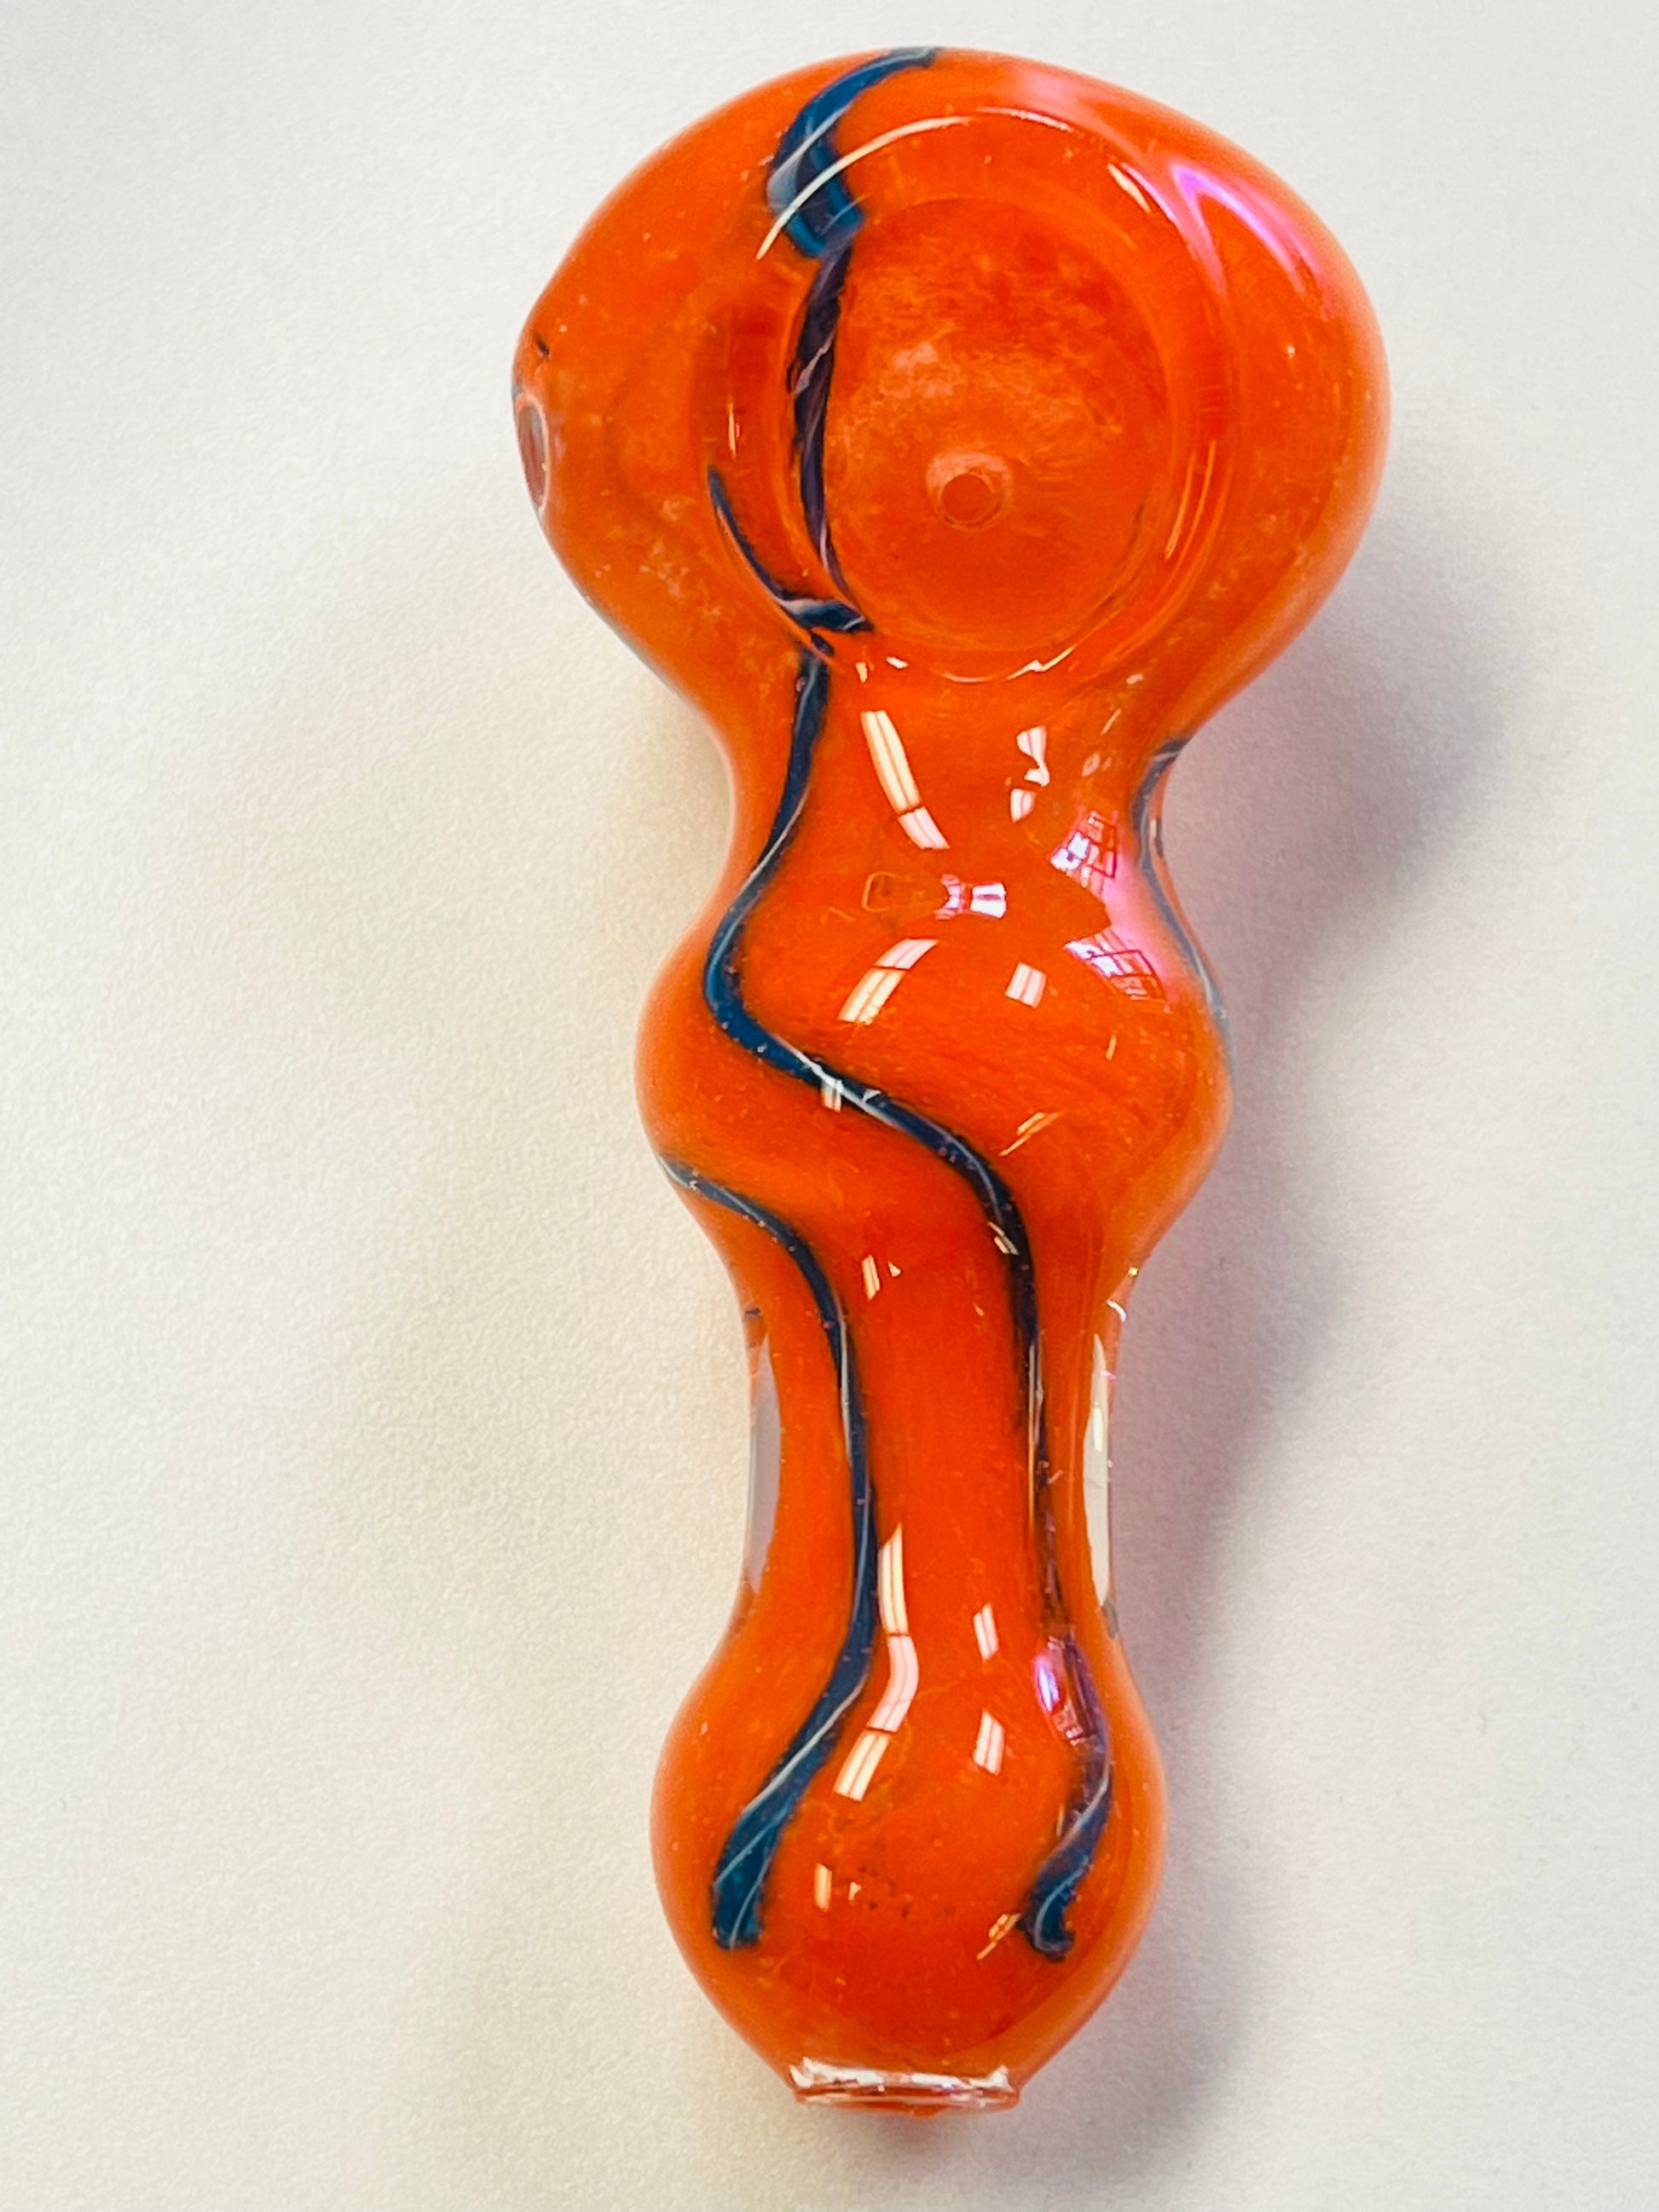 3.5 Inch Orange with Blue Stripes Hand Pipe yoga smokes yoga studio, delivery, delivery near me, yoga smokes smoke shop, find smoke shop, head shop near me, yoga studio, headshop, head shop, local smoke shop, psl, psl smoke shop, smoke shop, smokeshop, yoga, yoga studio, dispensary, local dispensary, smokeshop near me, port saint lucie, florida, port st lucie, lounge, life, highlife, love, stoned, highsociety. Yoga Smokes